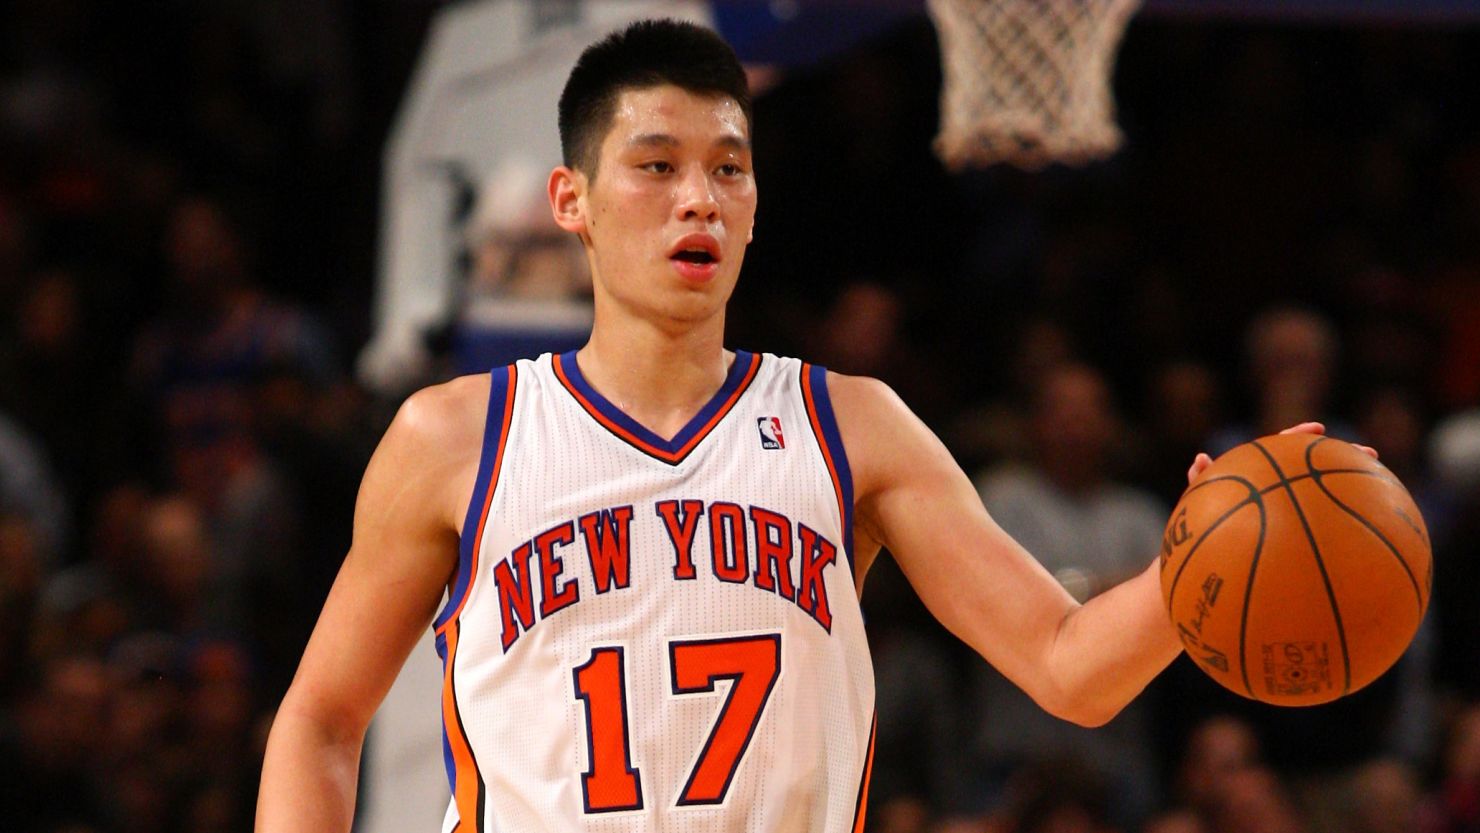 The Jeremy Lin phenomenon: 'Linsanity' by the numbers